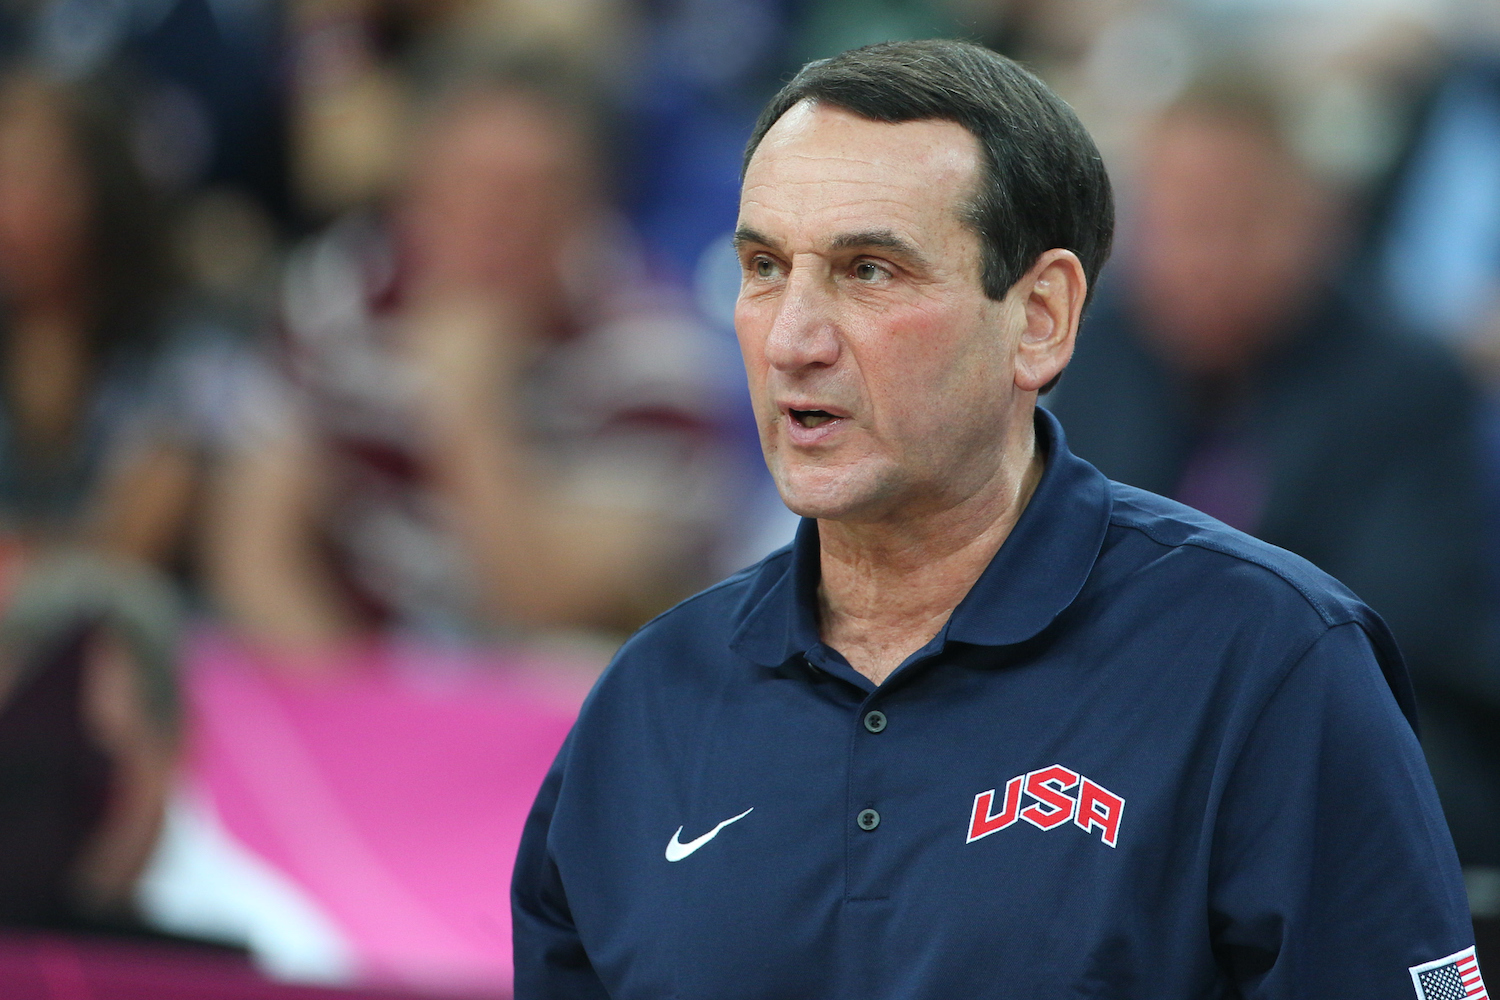 Mike Krzyzewski, also known as Coach K, stands on the sidelines during the 2012 Olympics.